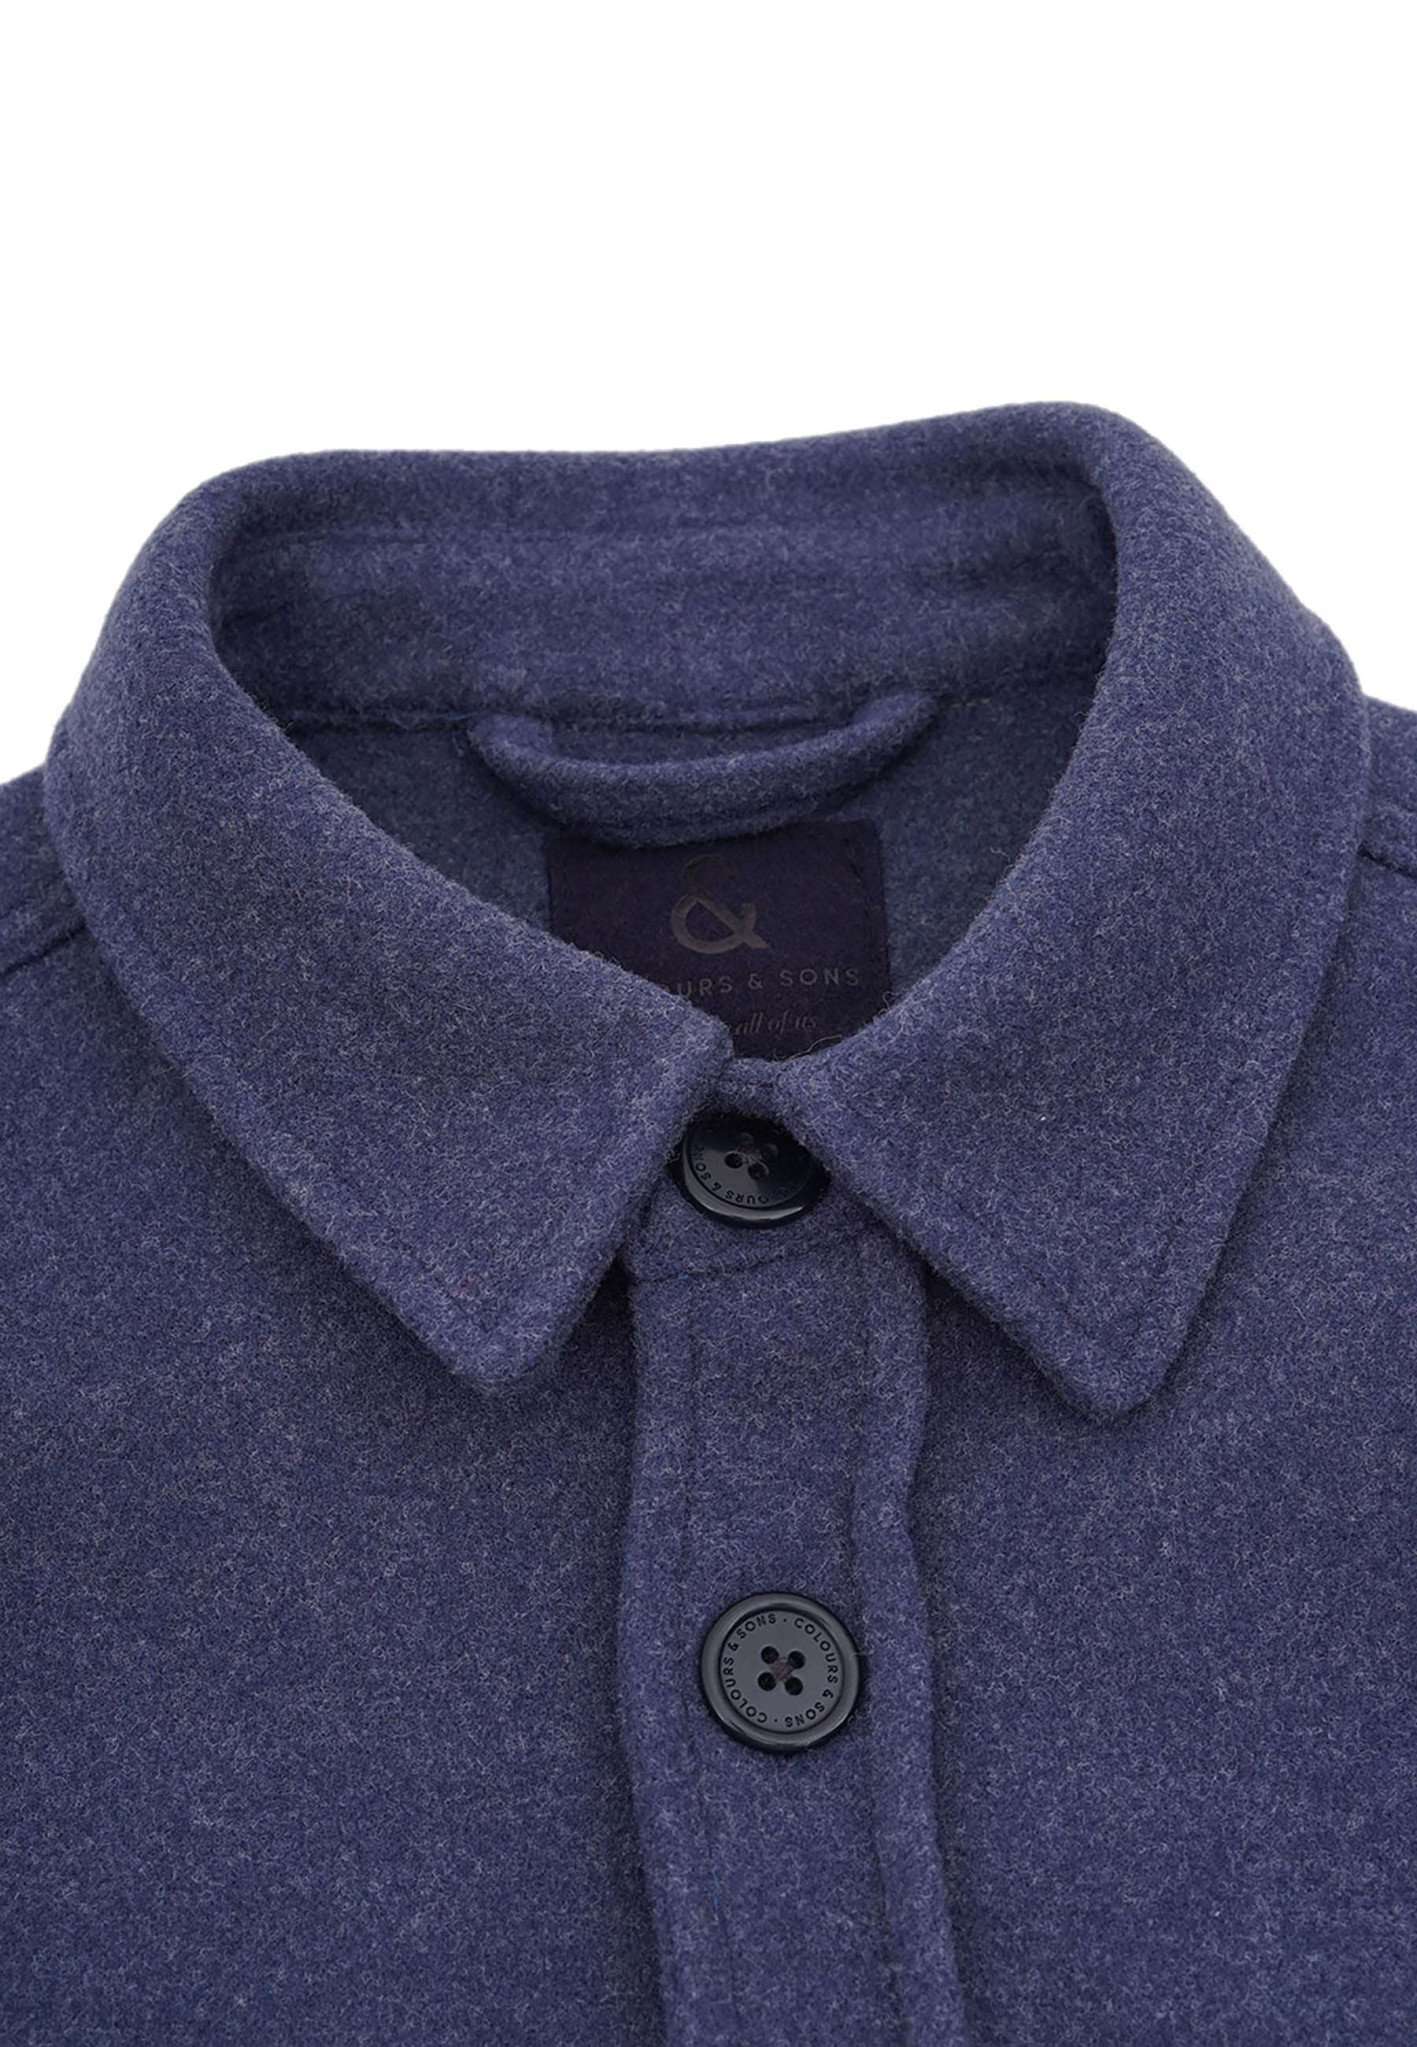 Worker Jacket-Soft Touch in River Jacken Colours and Sons   